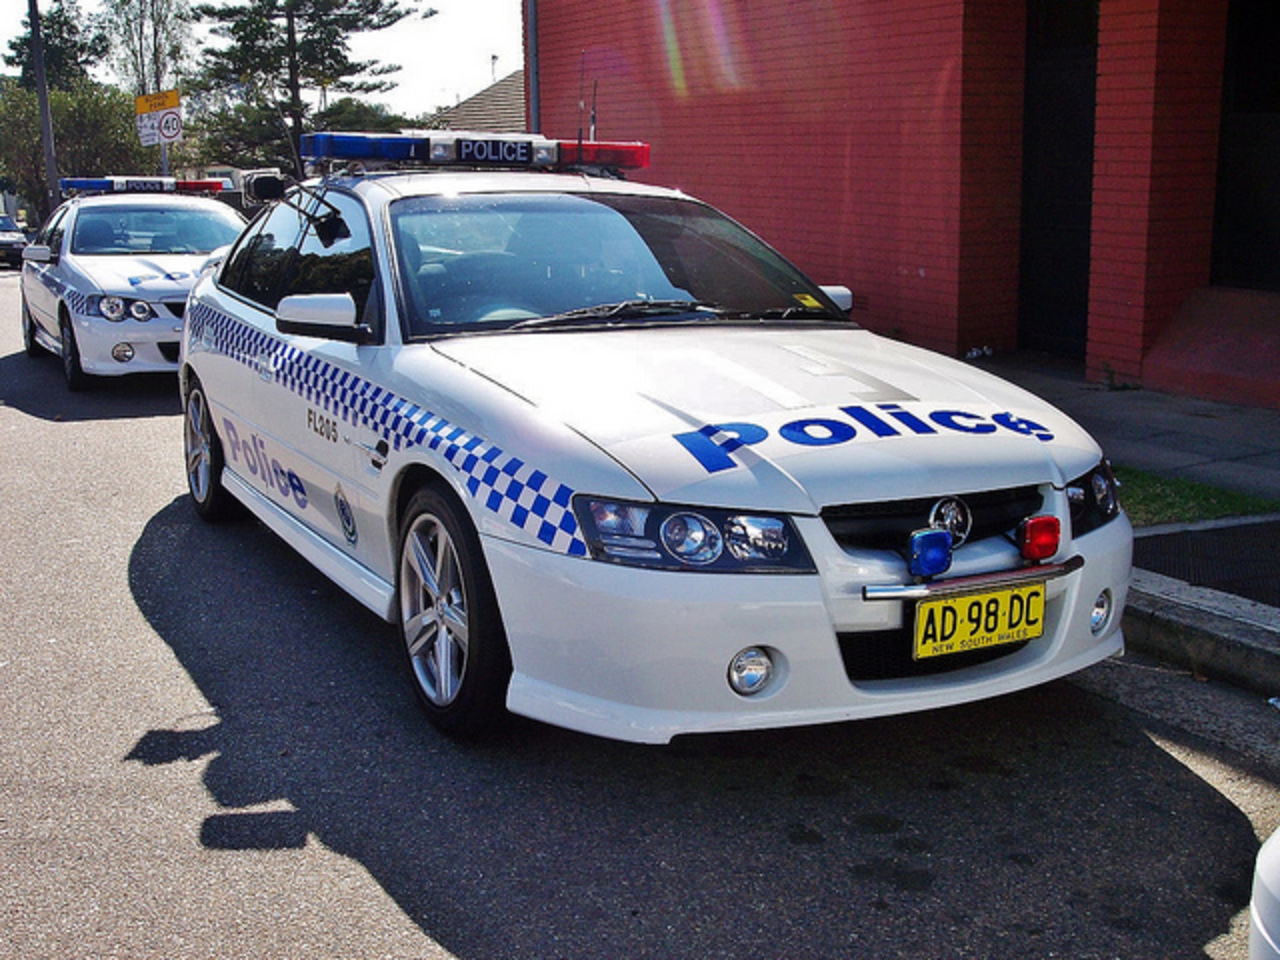 2004 Holden VZ Commodore SS - NSW Police | Flickr - Photo Sharing!